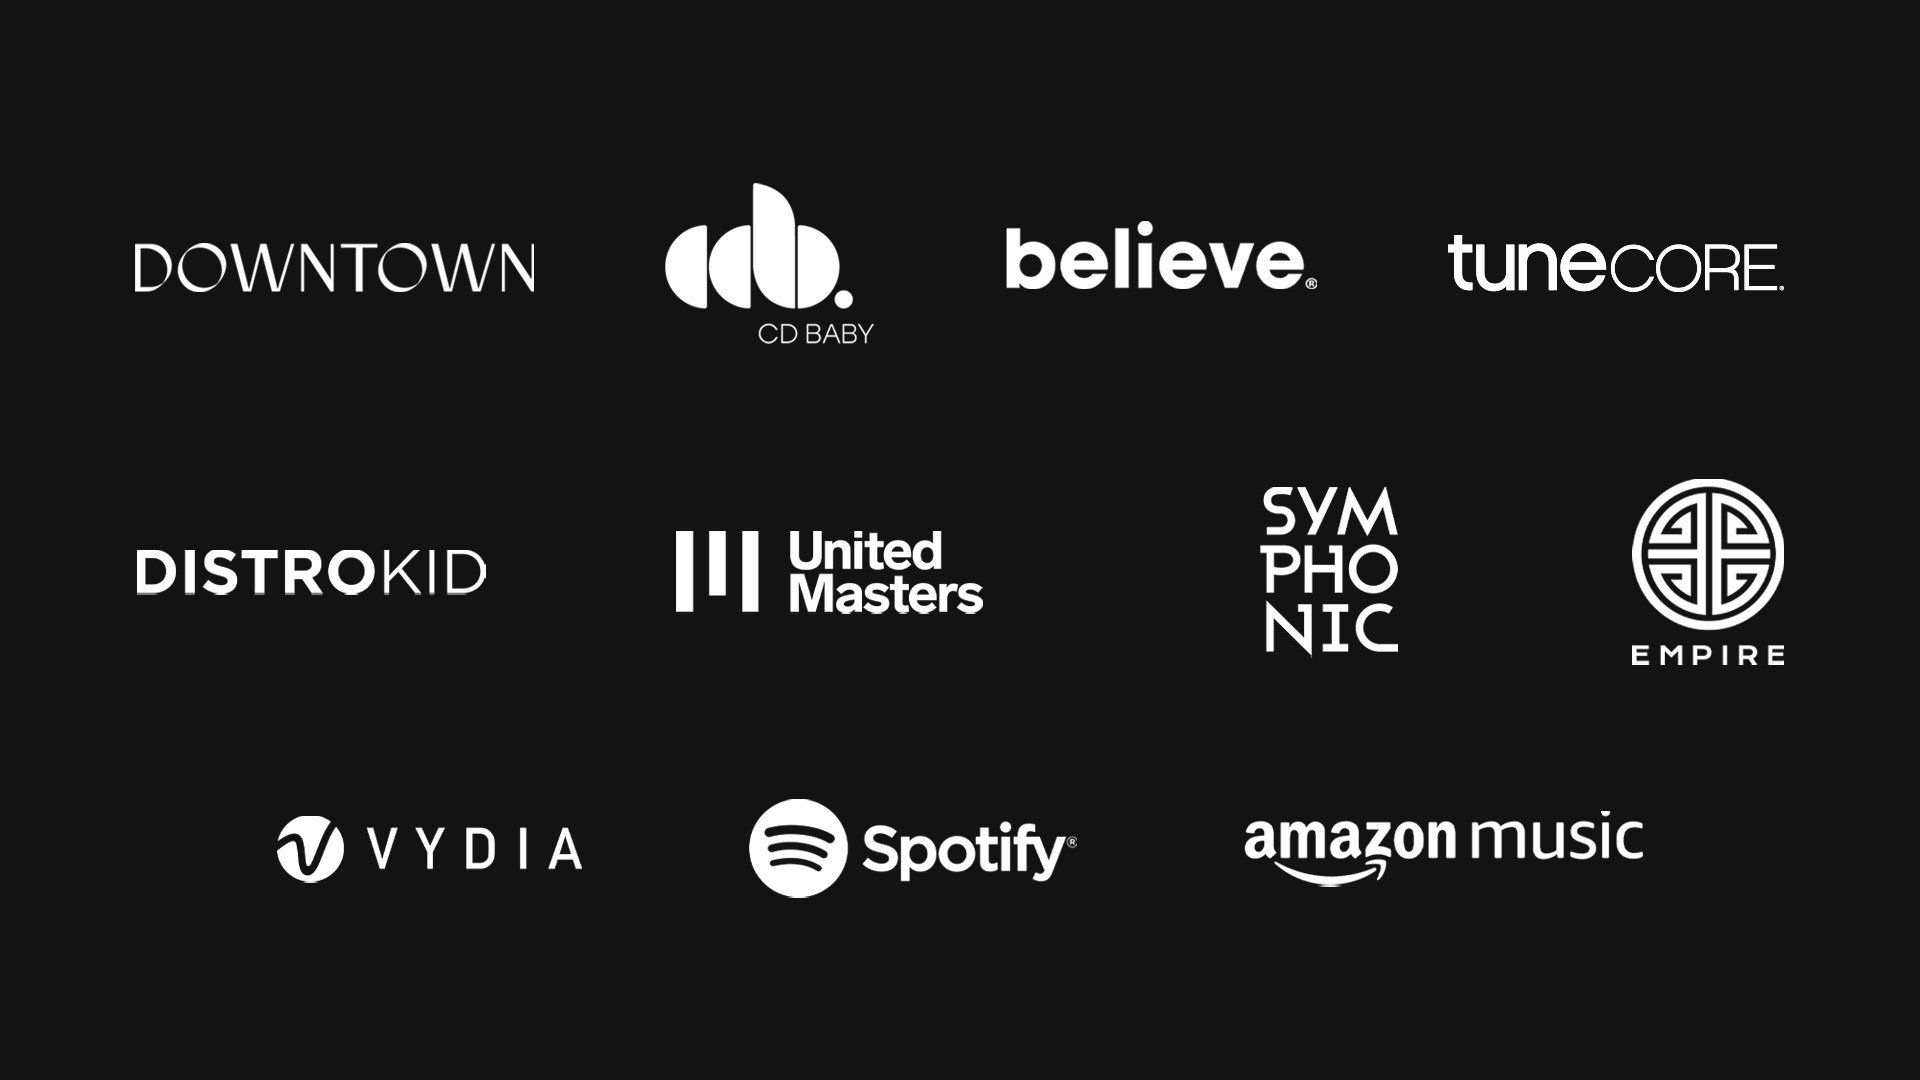 Believe, EMPIRE, Spotify, Amazon Music and more team up to form global task force ‘aimed at eradicating streaming fraud’ – Music Business Worldwide